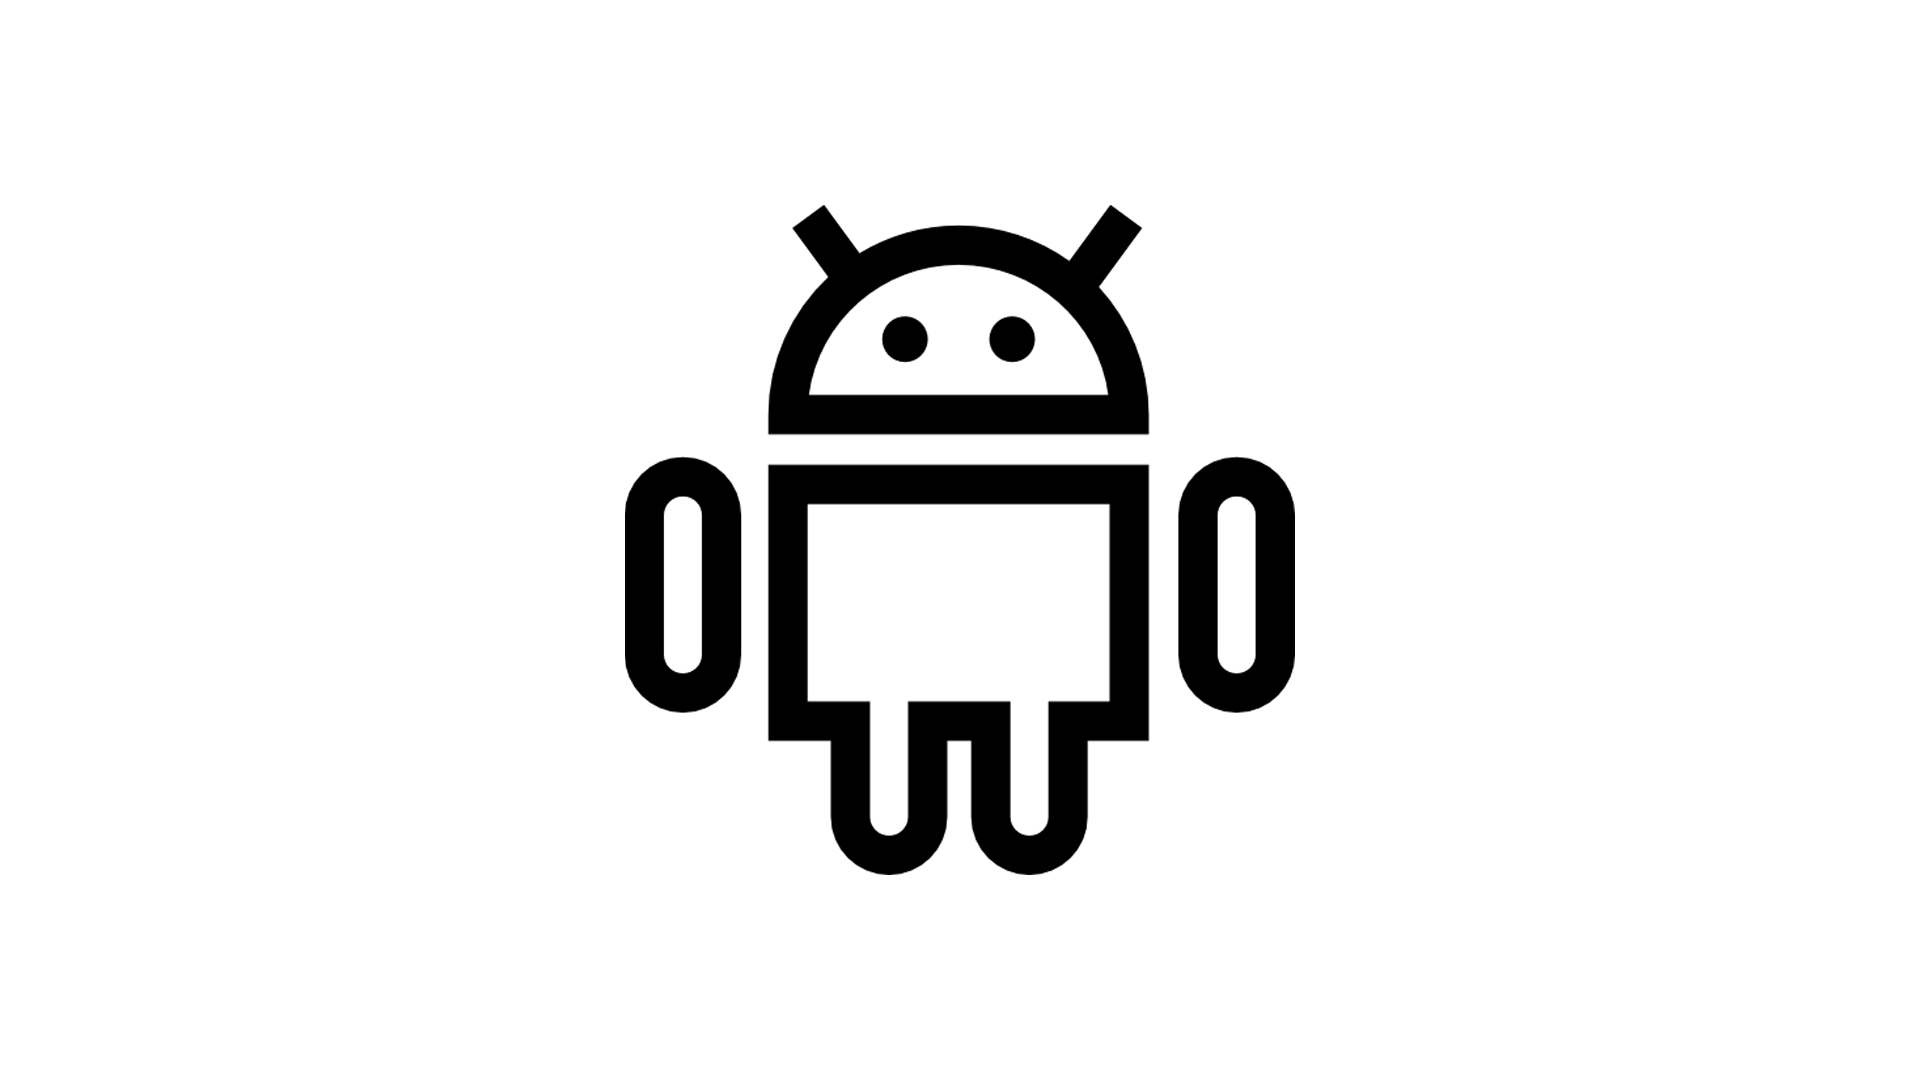 ANDROID-ICON